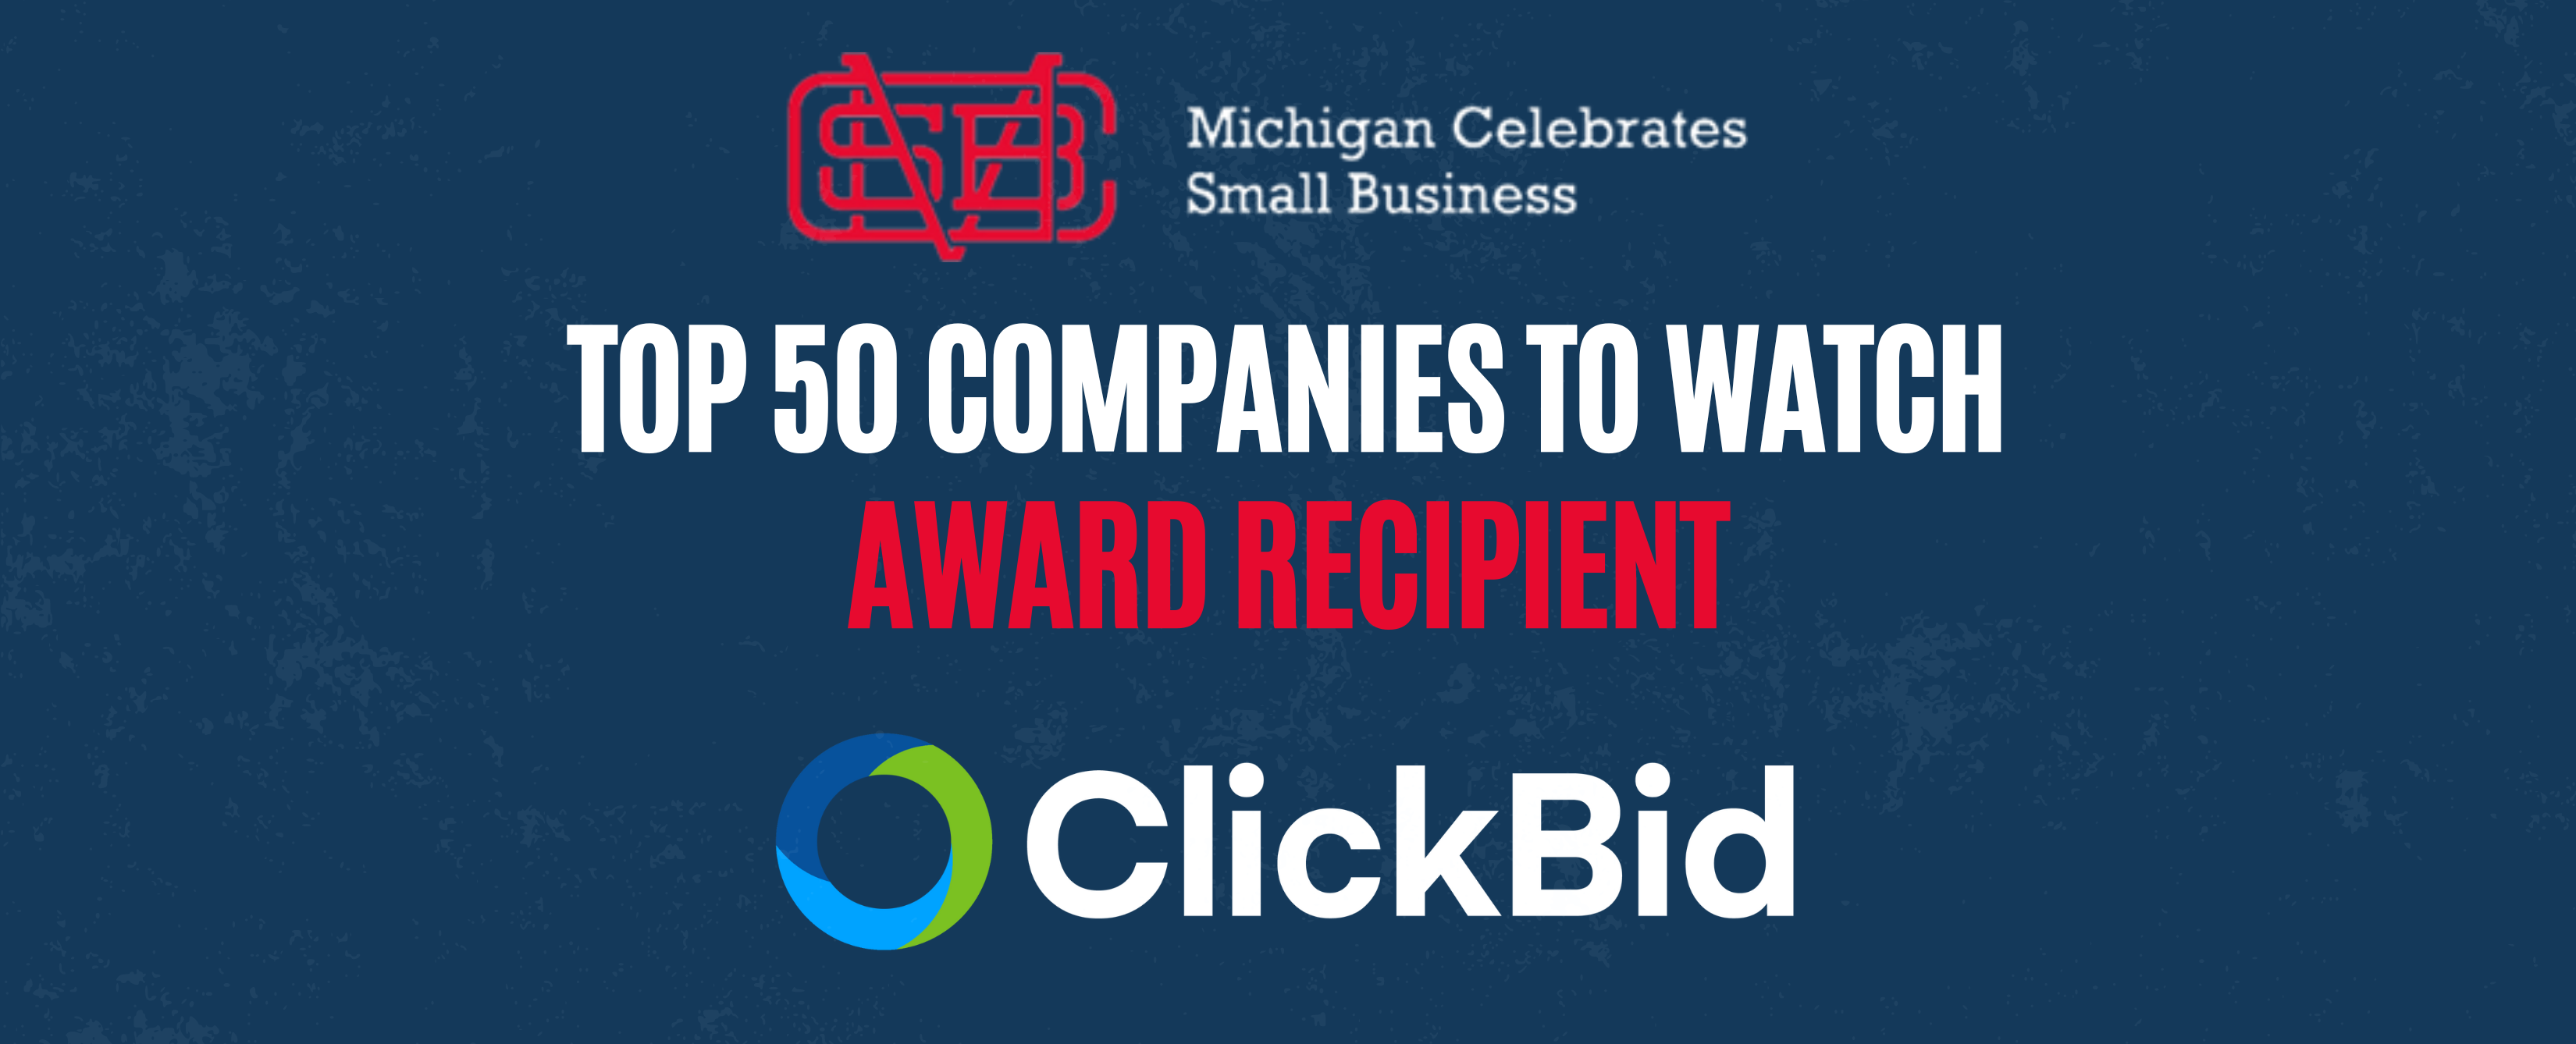 ClickBid to be Named One of Michigan’s 50 Companies to Watch at the 19th Annual Michigan Celebrates Awards Gala